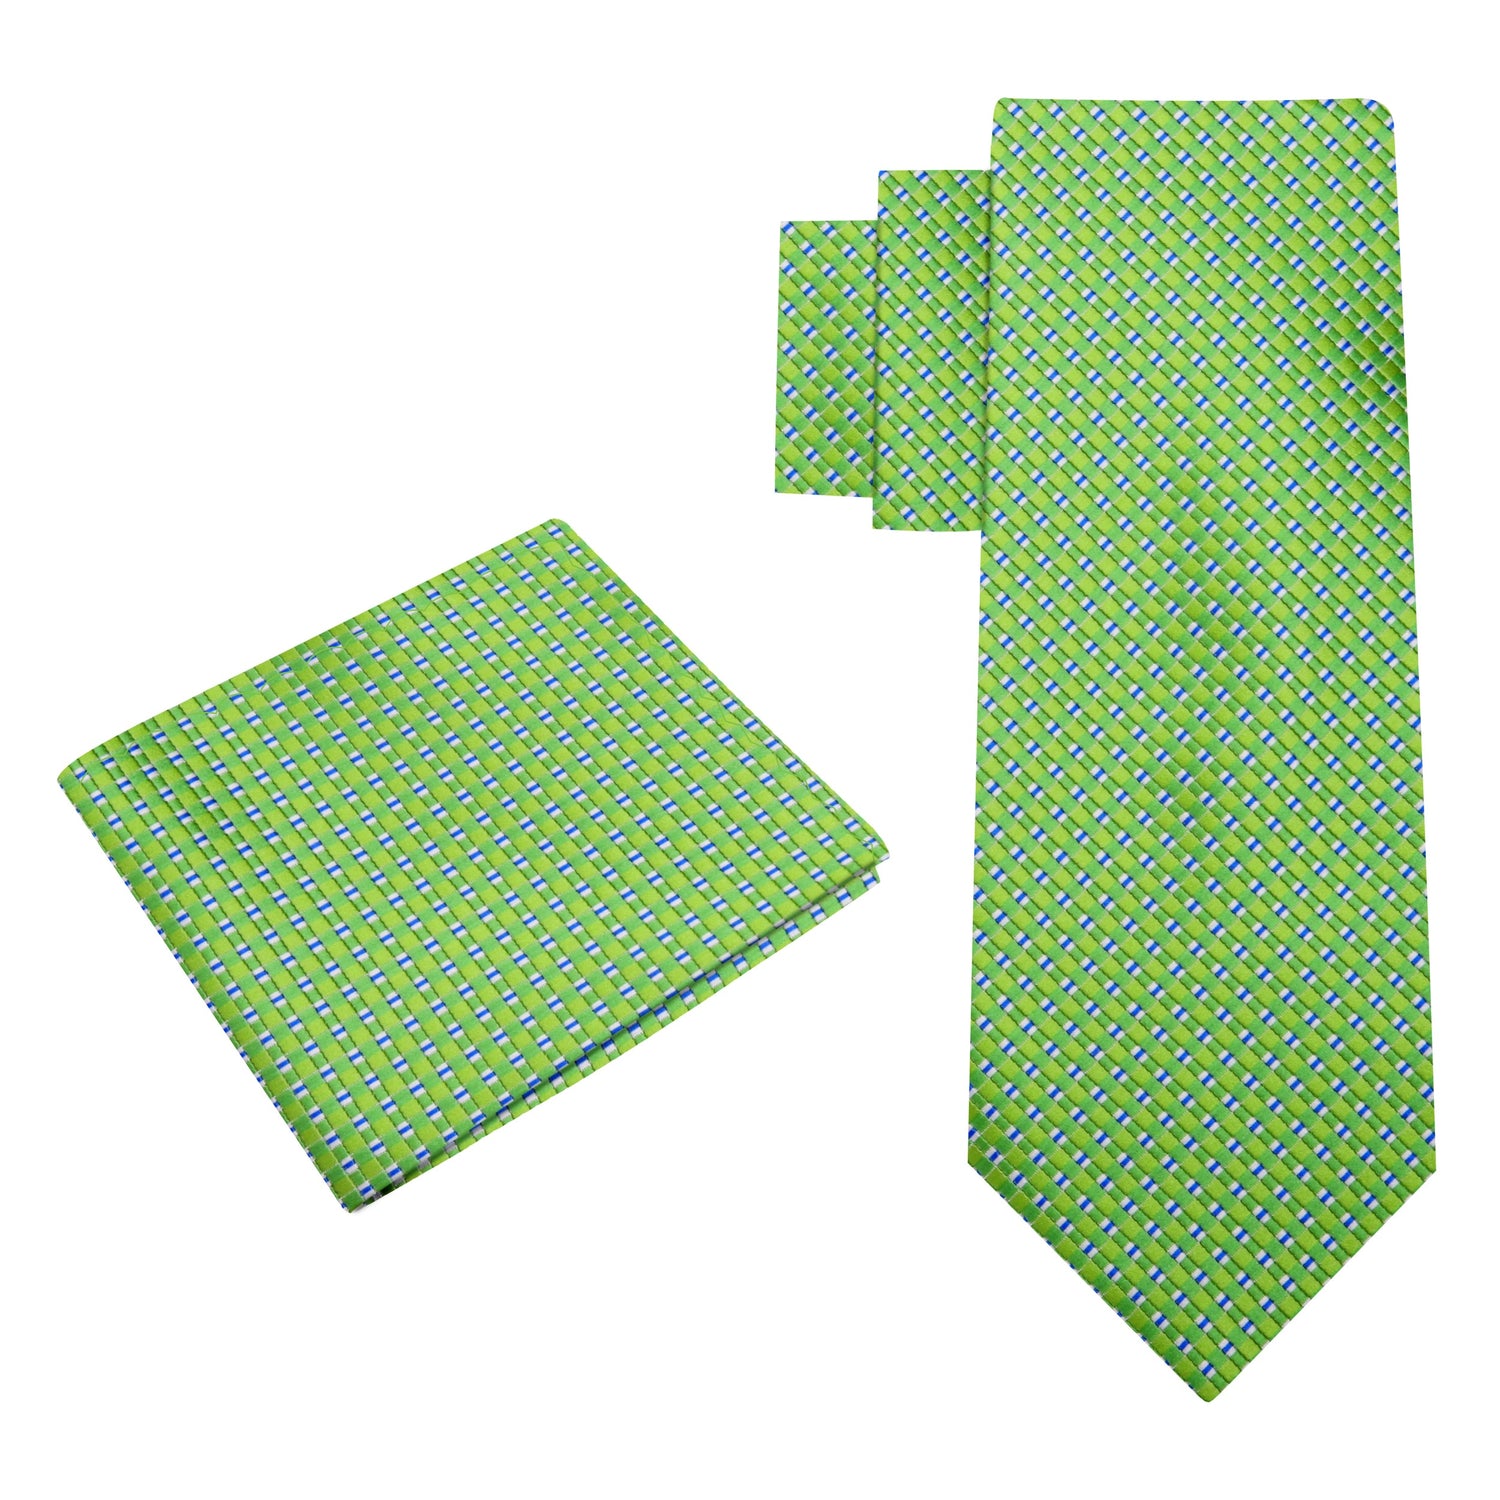 Alt View: Green and Blue Geometric Metallic Perfection Tie and Pocket Square